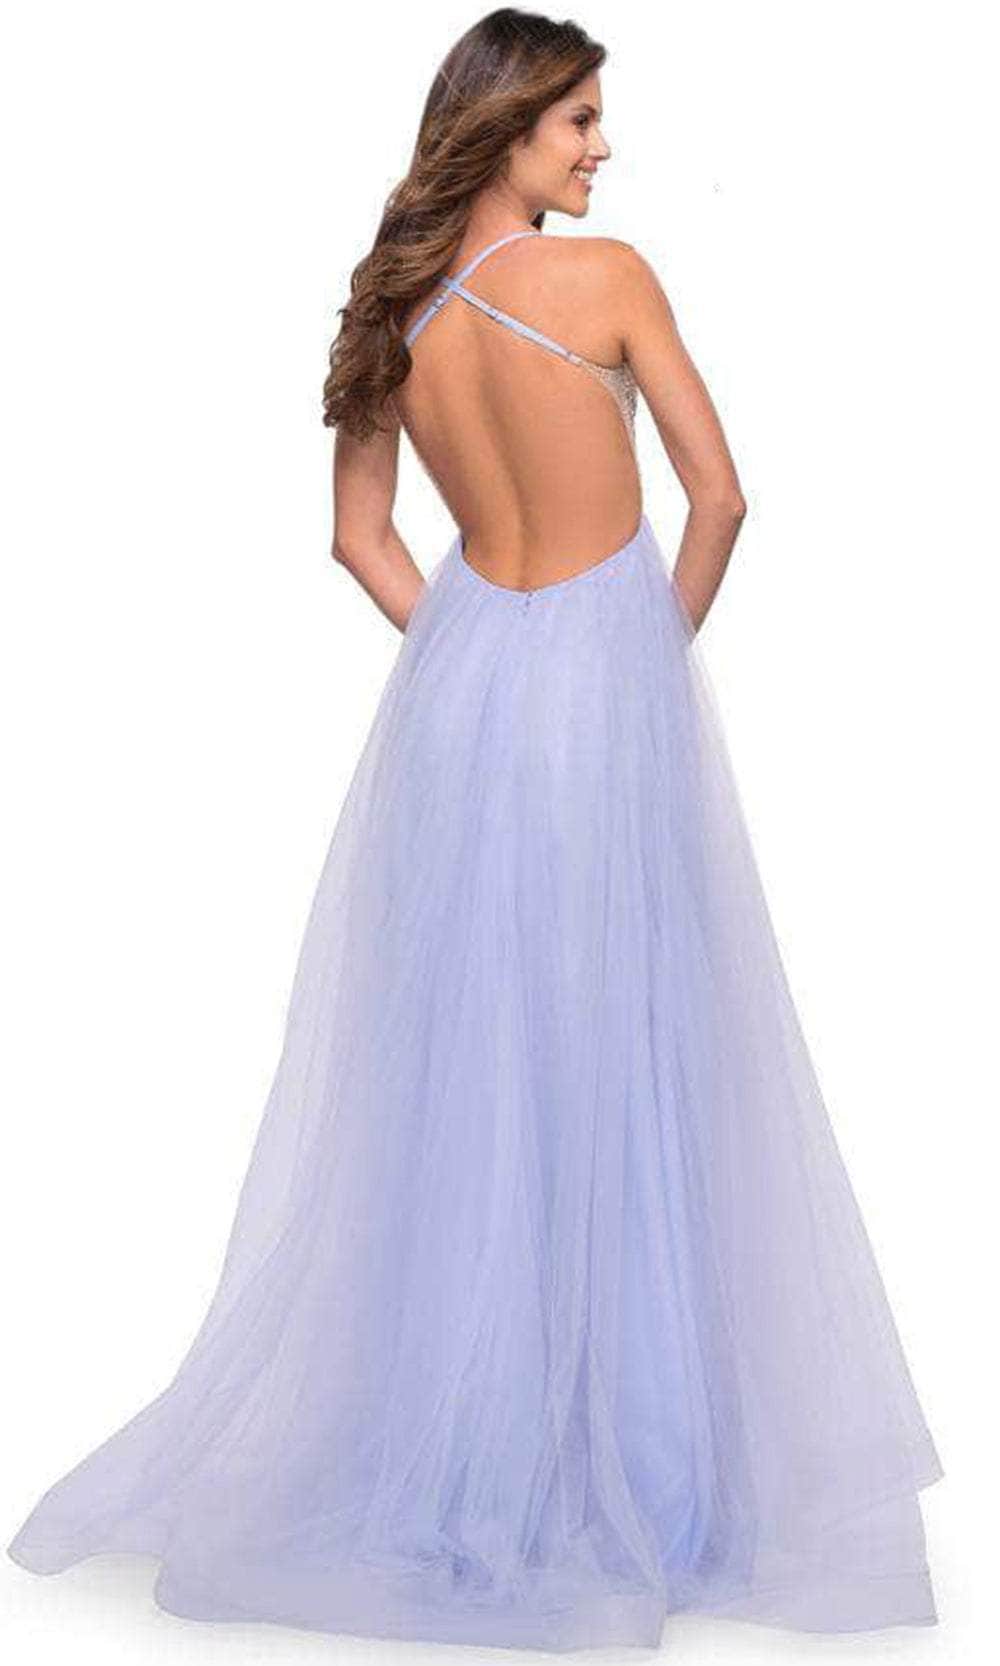 La Femme 30697 - Corset Bodice Tulle Formal Gown Special Occasion Dress